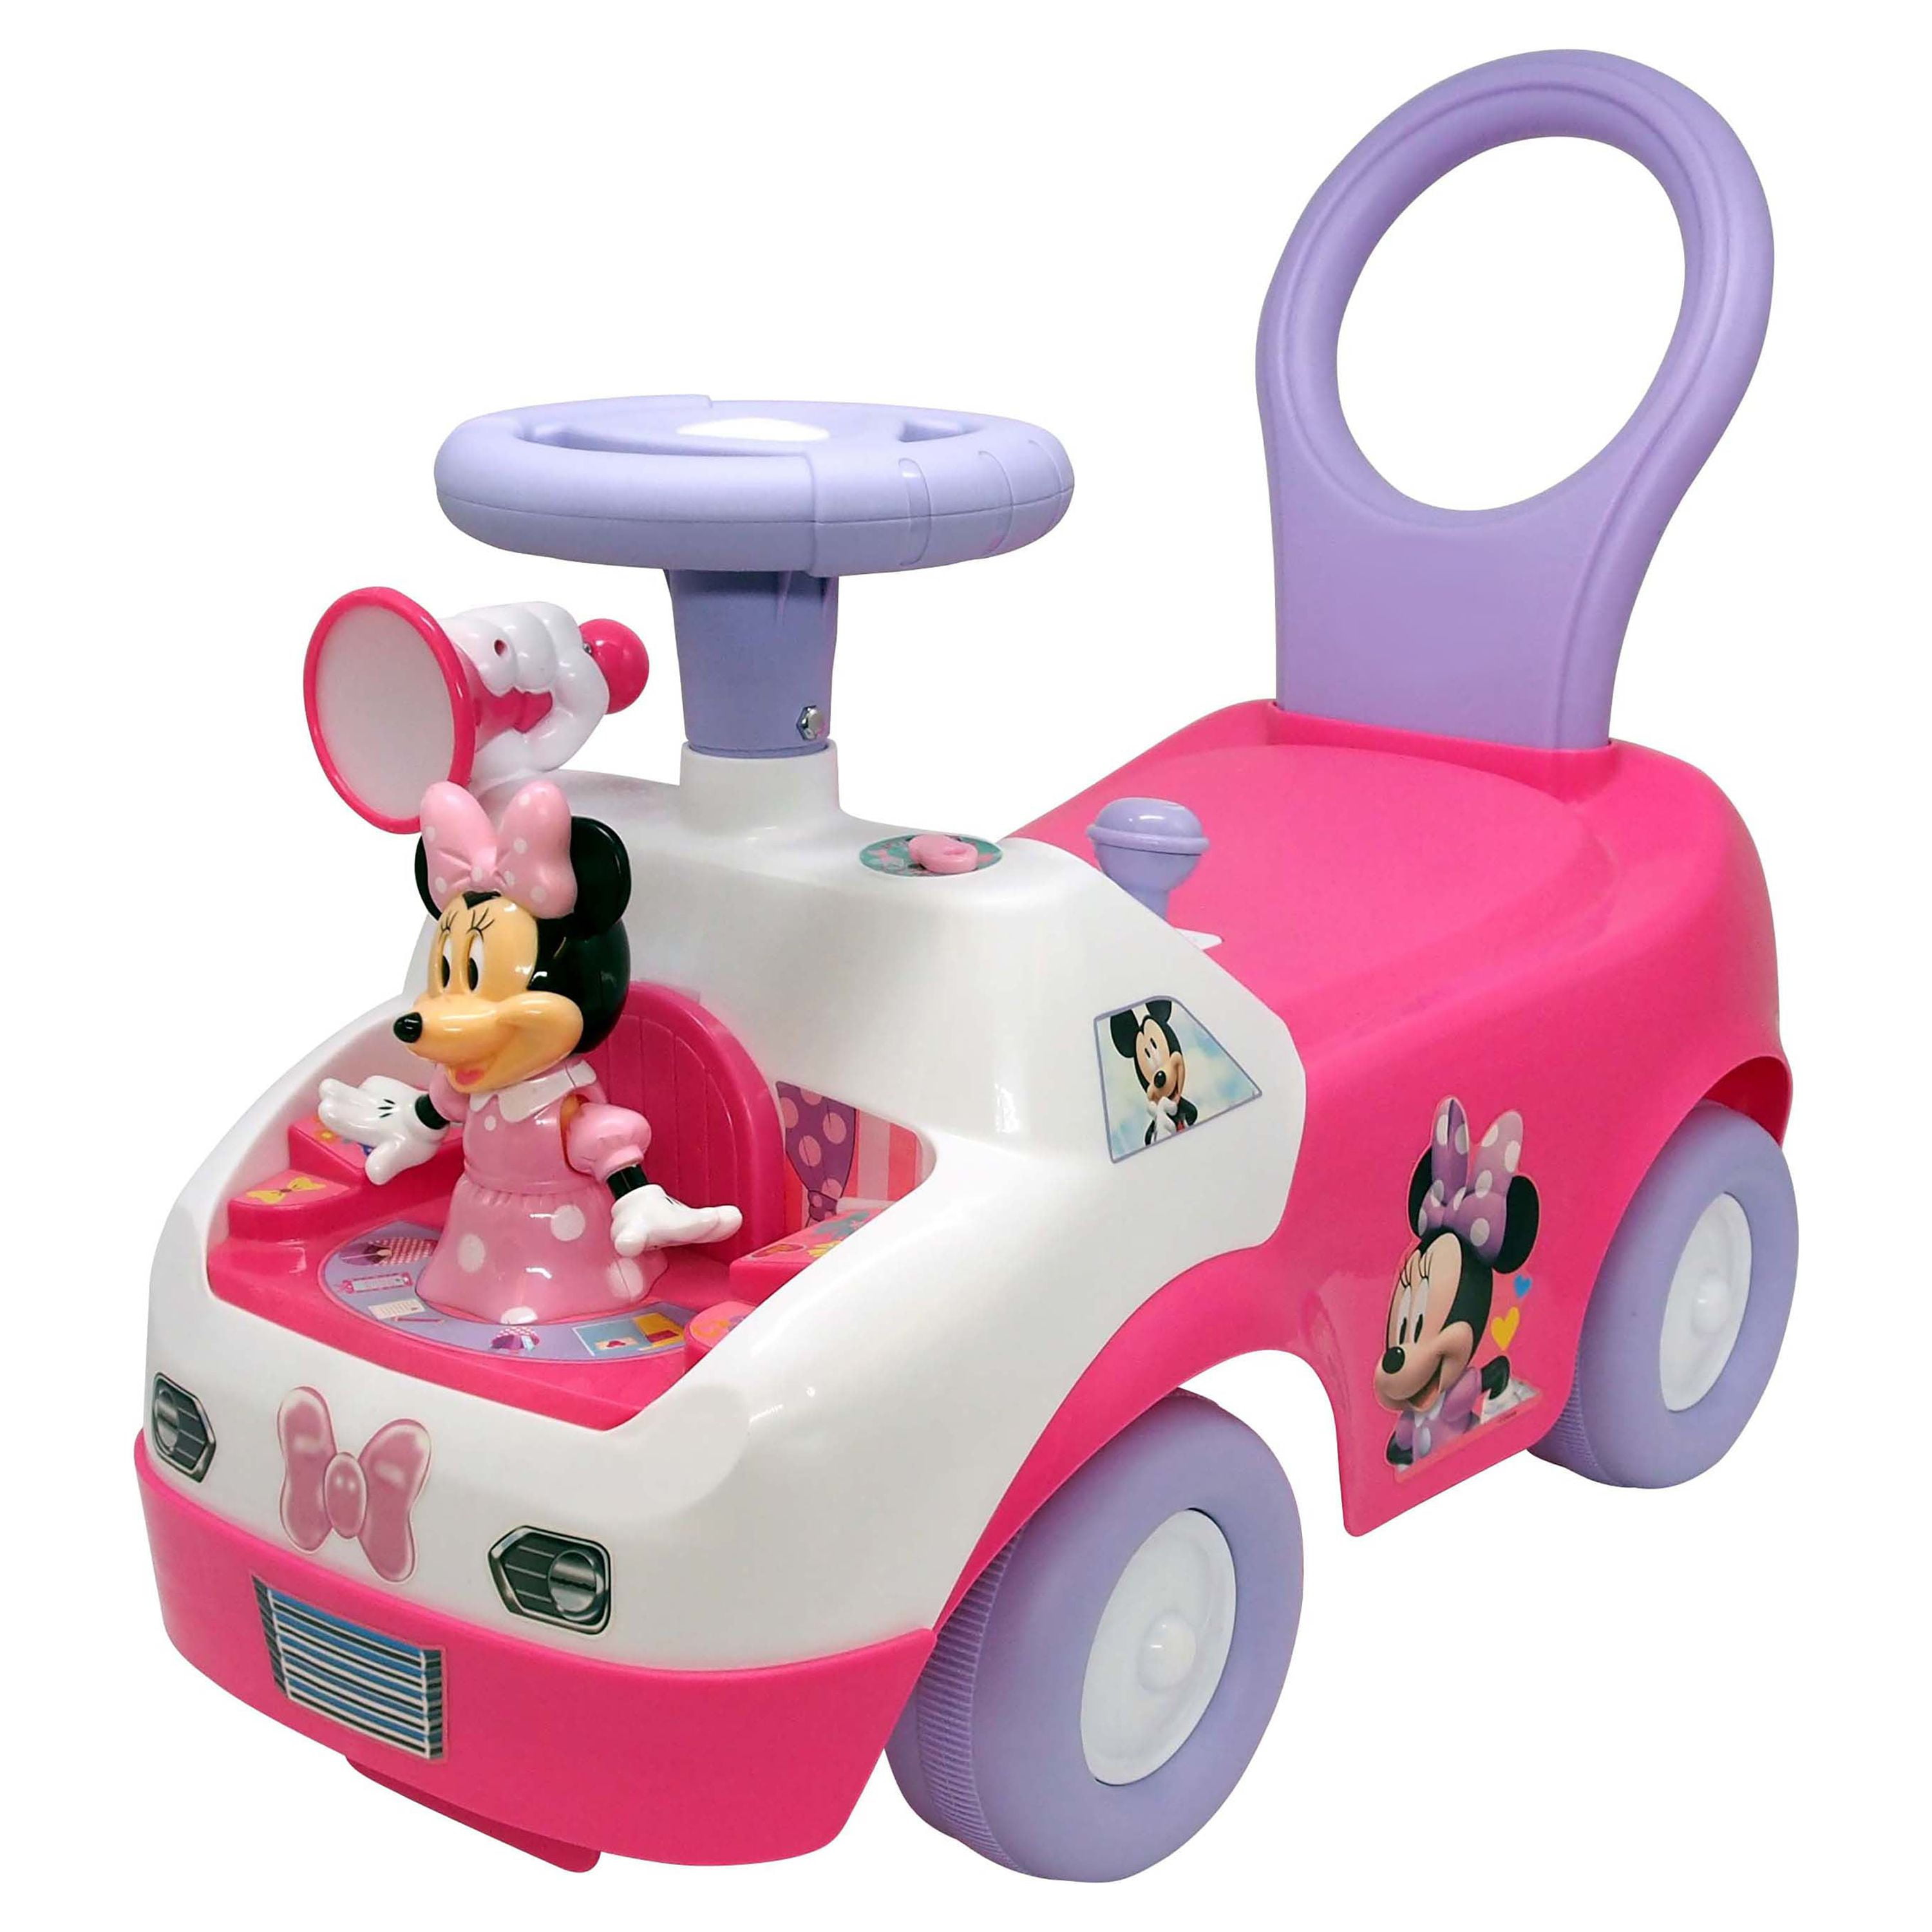 Activity Car Minnie Dancing Ride-On Interactive Kiddieland Mouse with Sounds